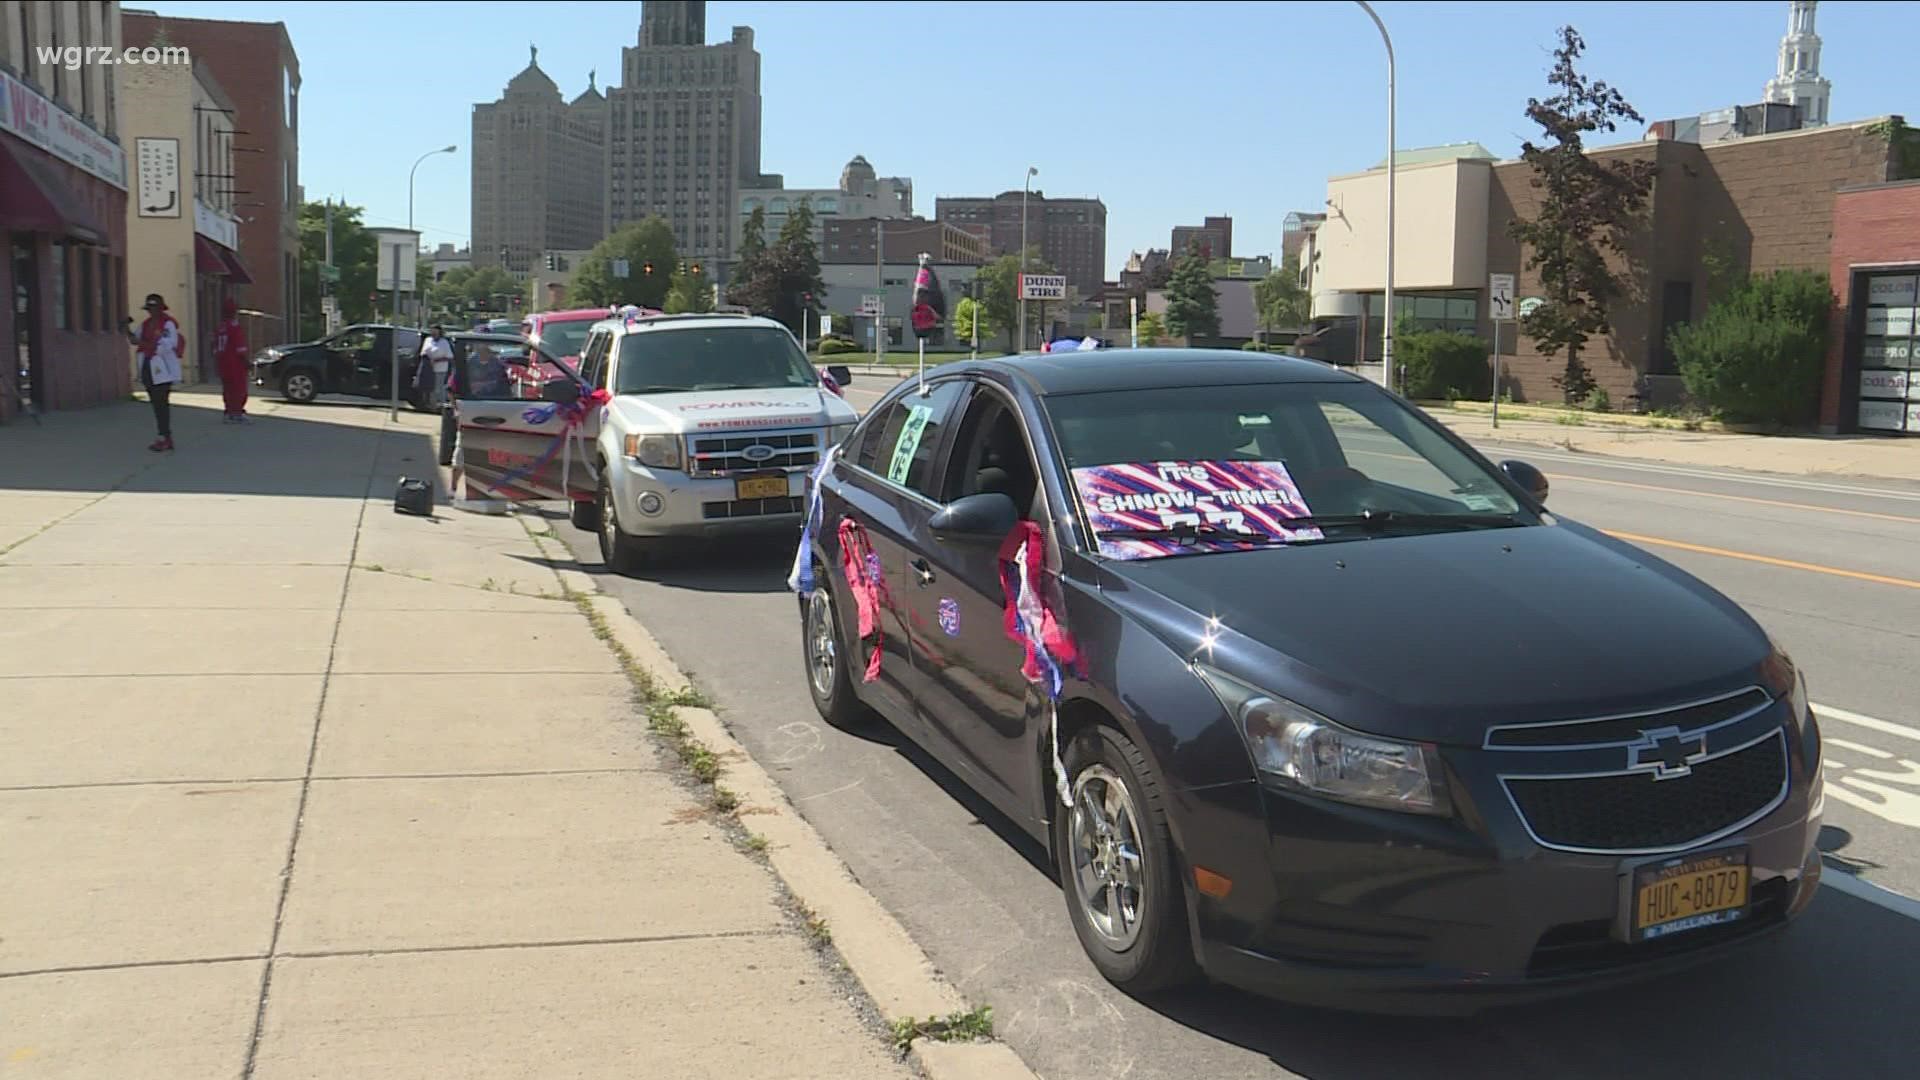 A welcome wagon car parade was happening in Buffalo this afternoon. Bills Mafia was there to support the team tomorrow.